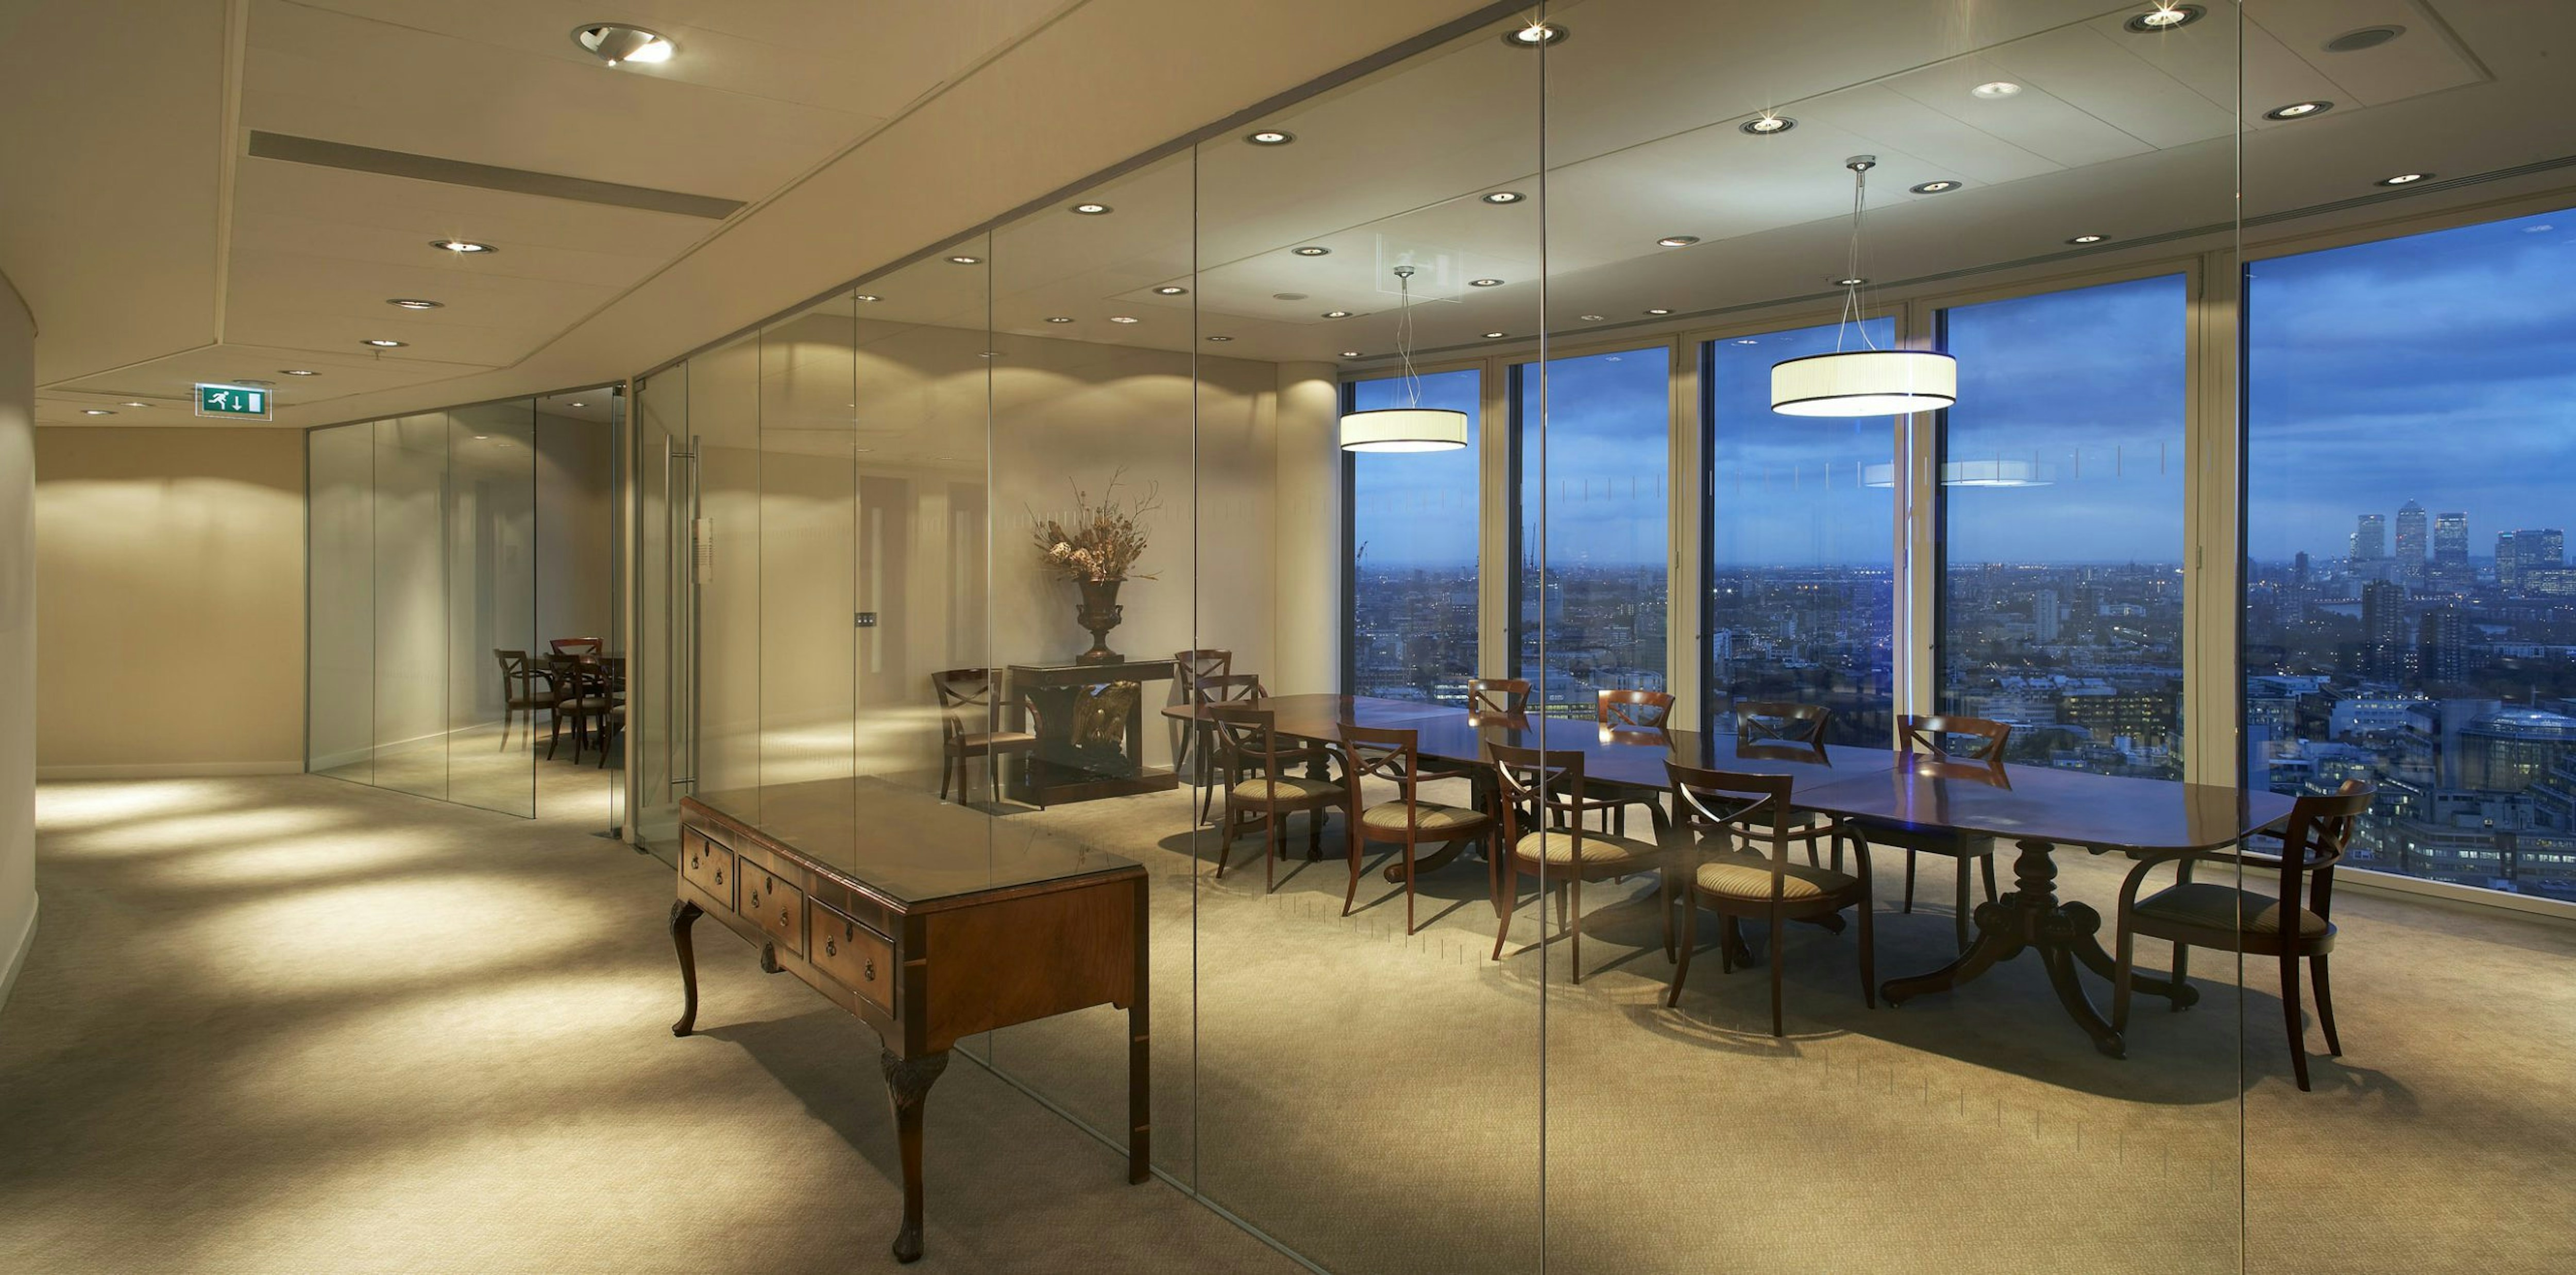 Willis Boardroom with panoramic view